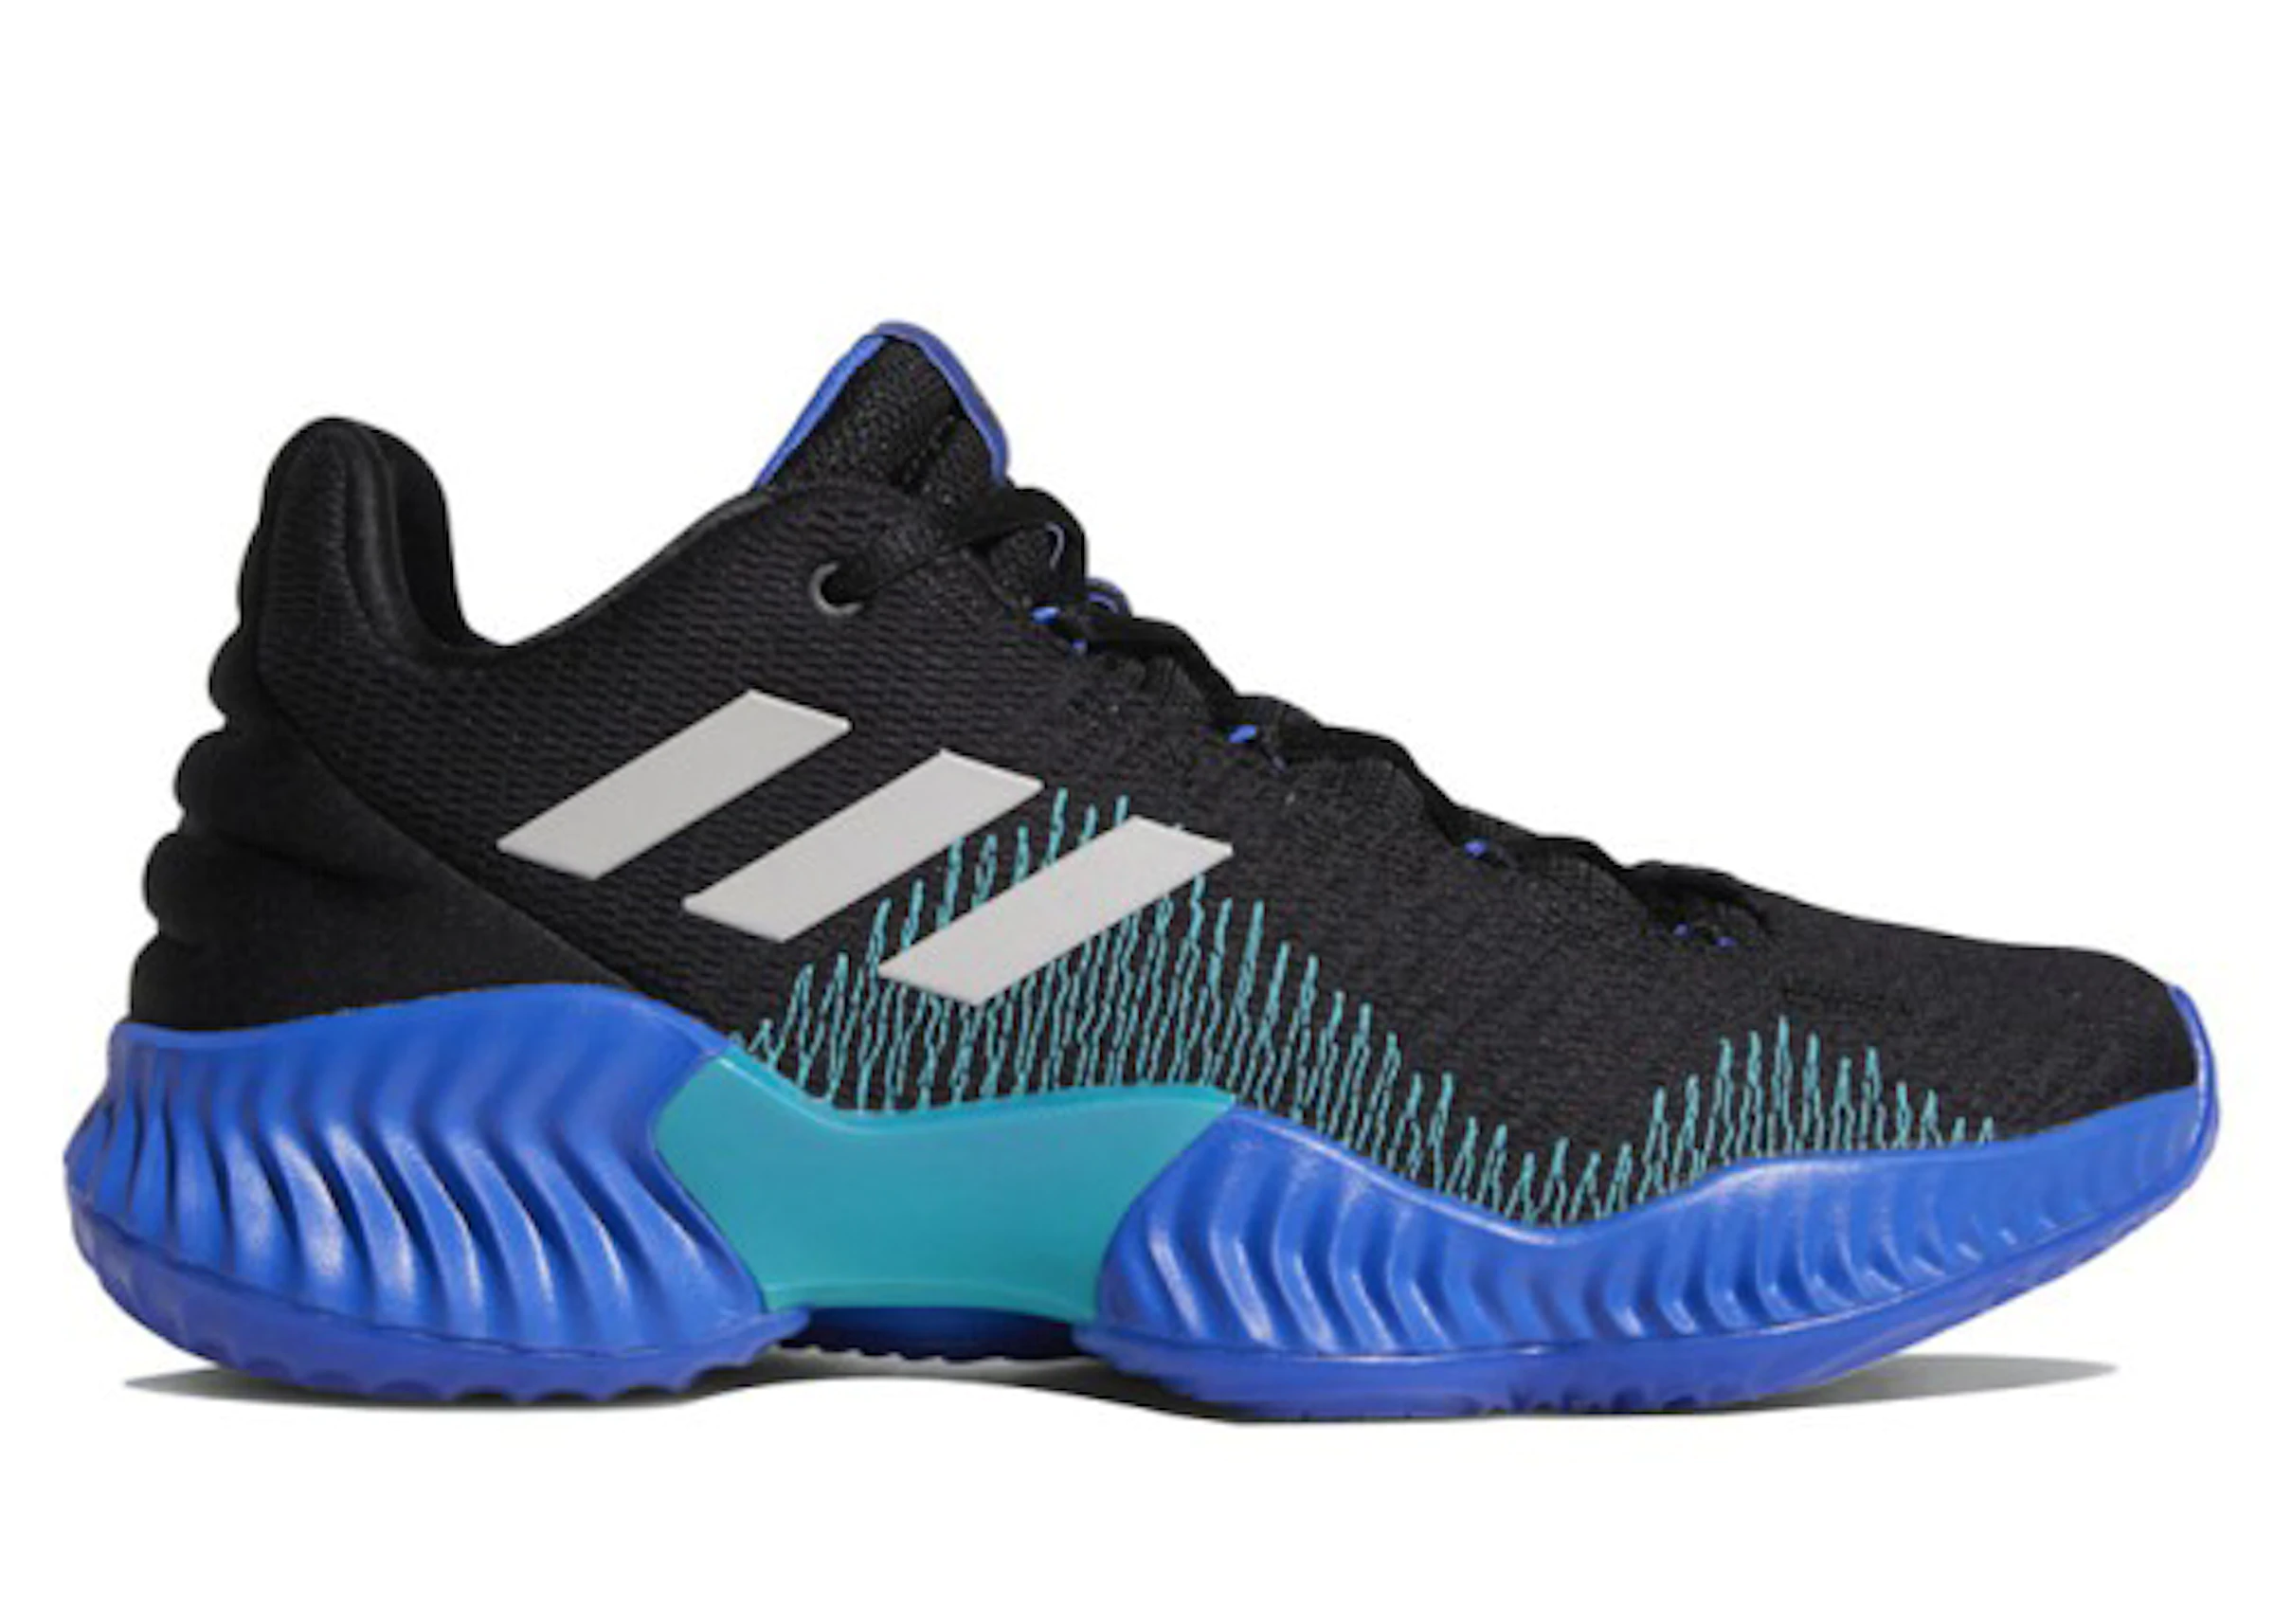 Ideal newspaper shorthand adidas Pro Bounce 2018 Low Hornets - AC7427 - US